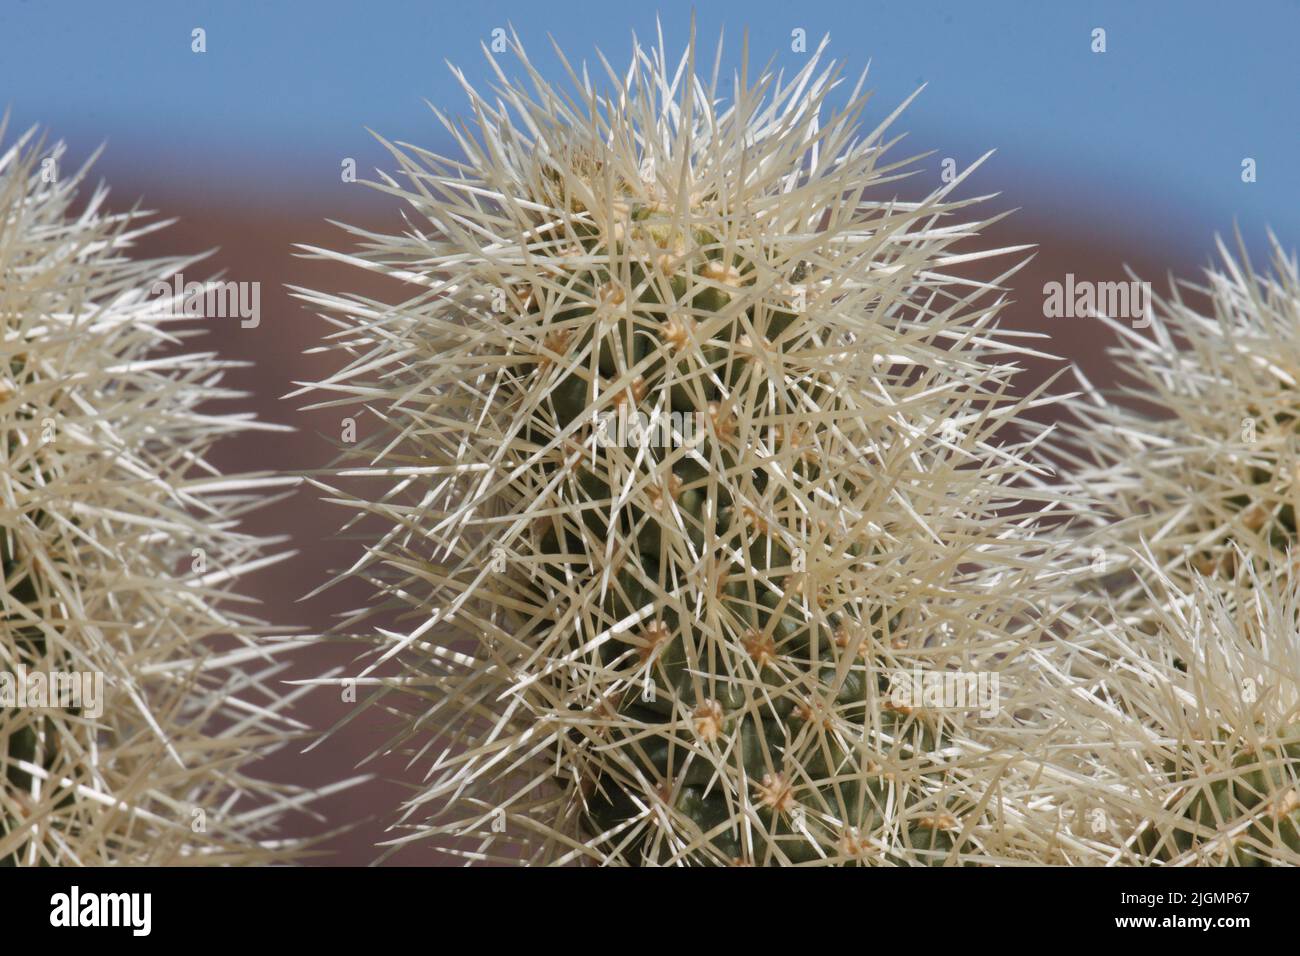 Tan sheathed spines obscure trichomatic glochidiate areoles of Cylindropuntia Bigelovii, Cactaceae, native in the northwest Sonoran Desert, Winter. Stock Photo